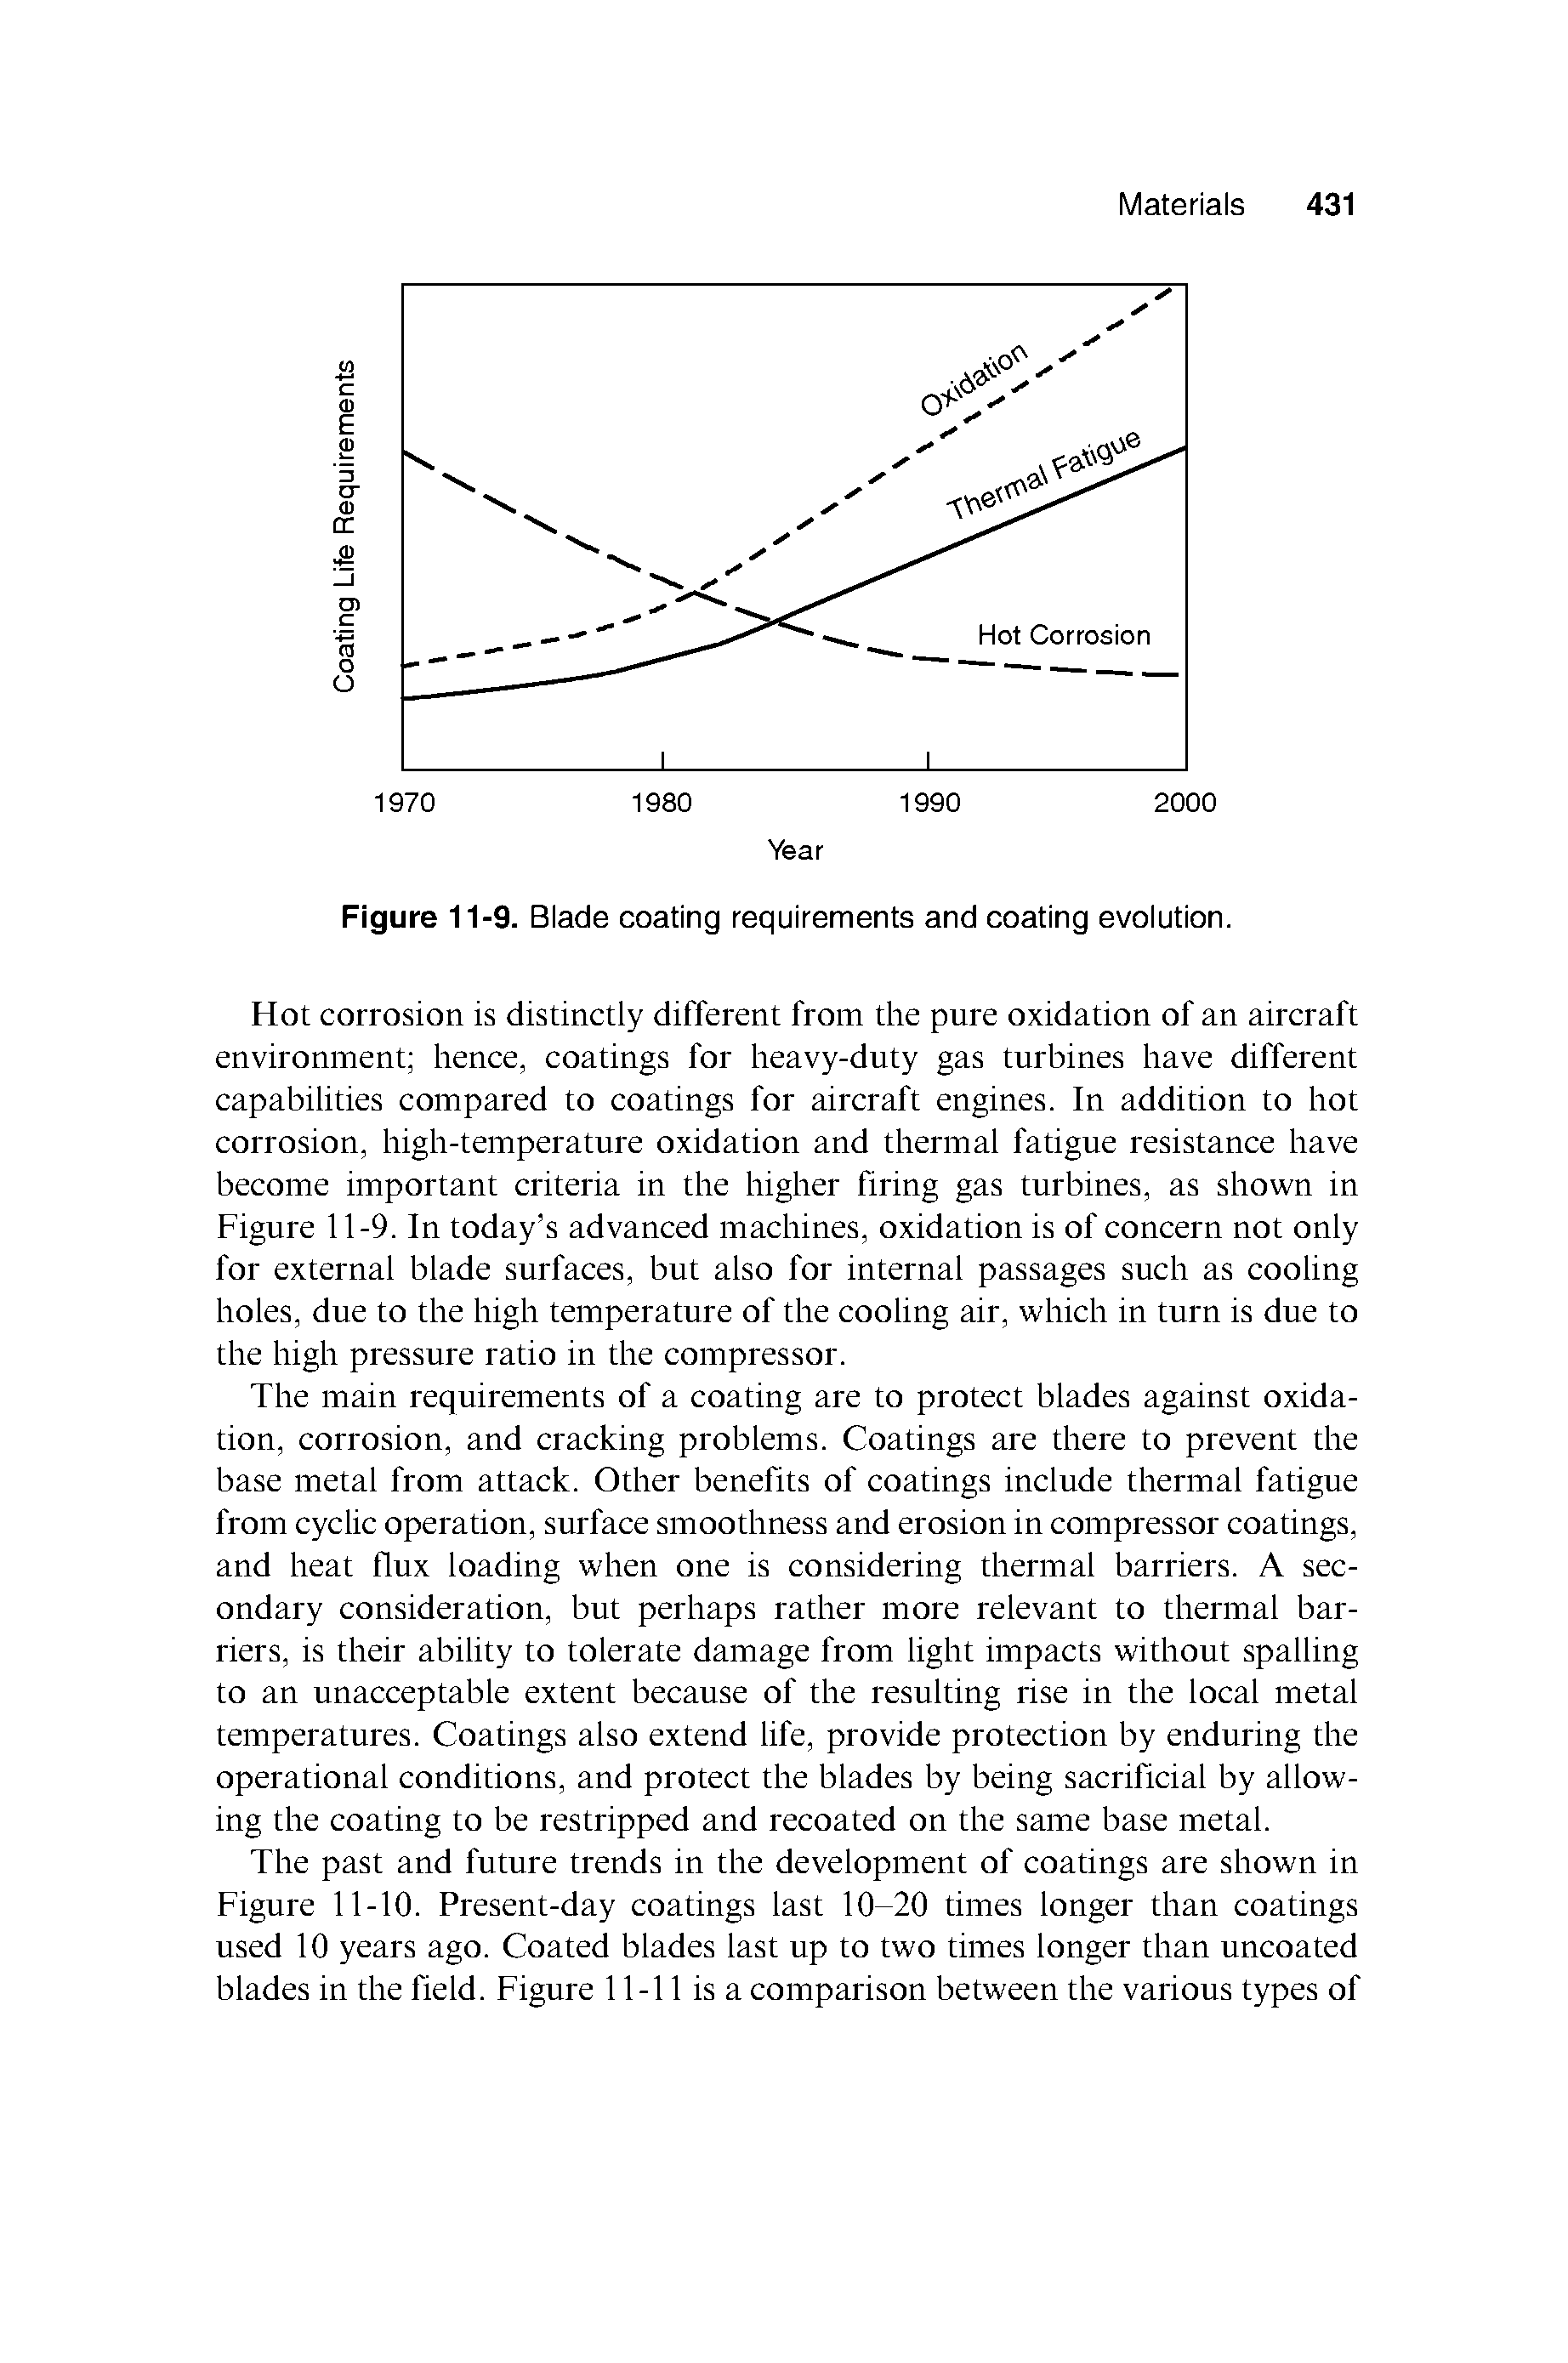 Figure 11-9. Blade coating requirements and coating evolution.